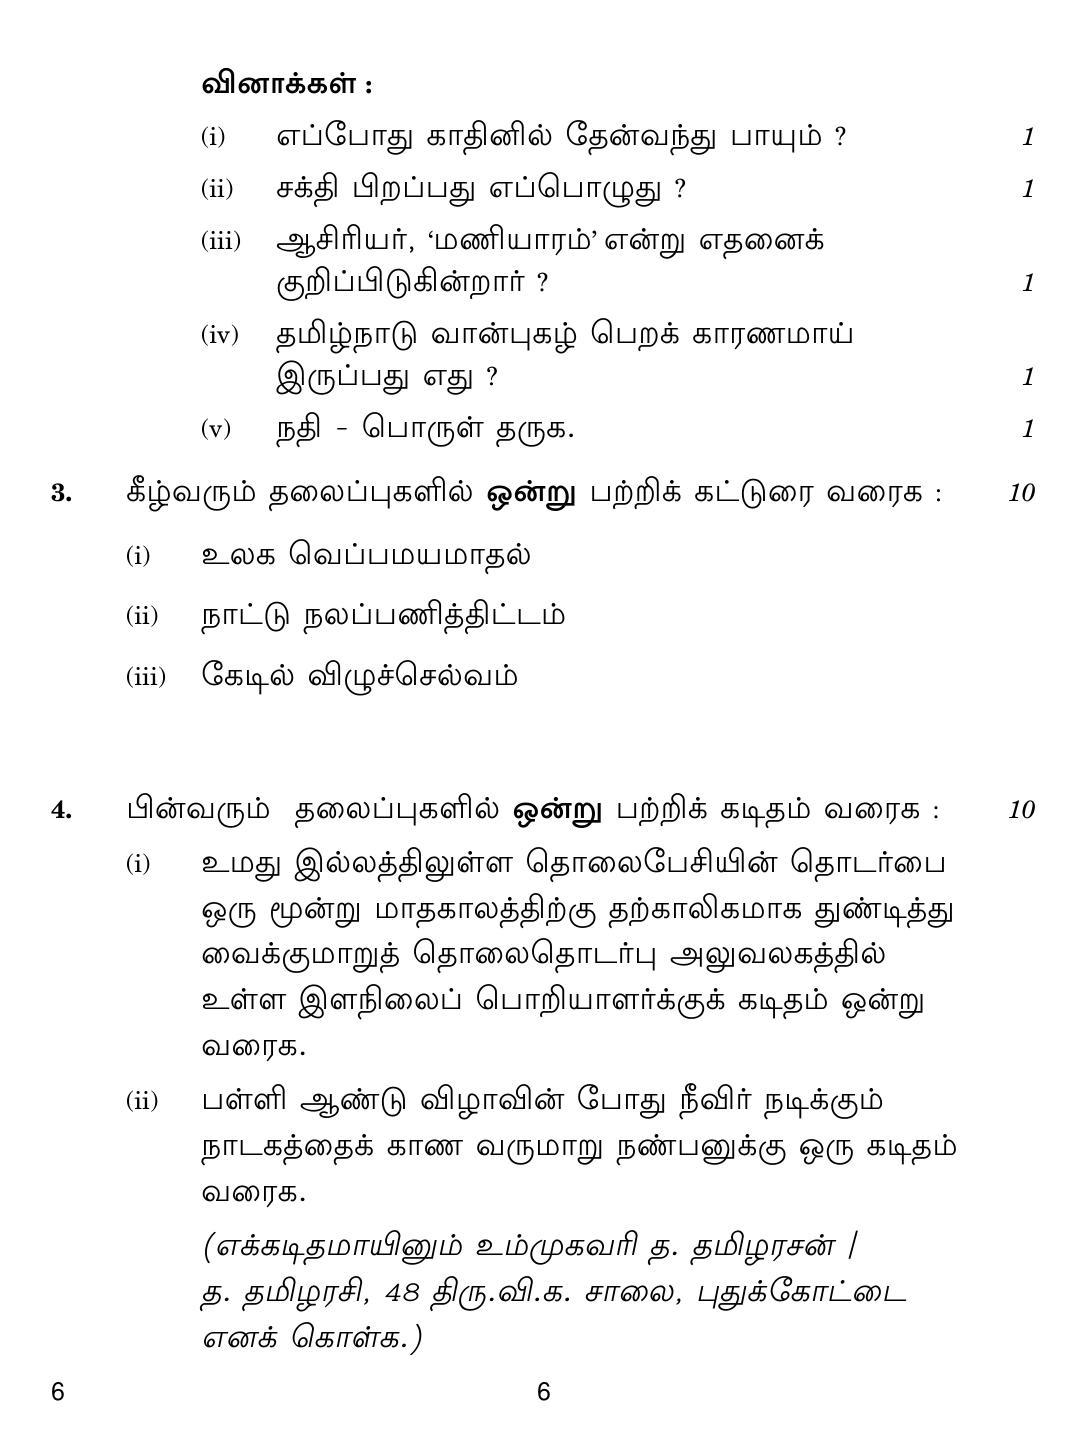 CBSE Class 12 6 Tamil 2018 Question Paper - Page 6